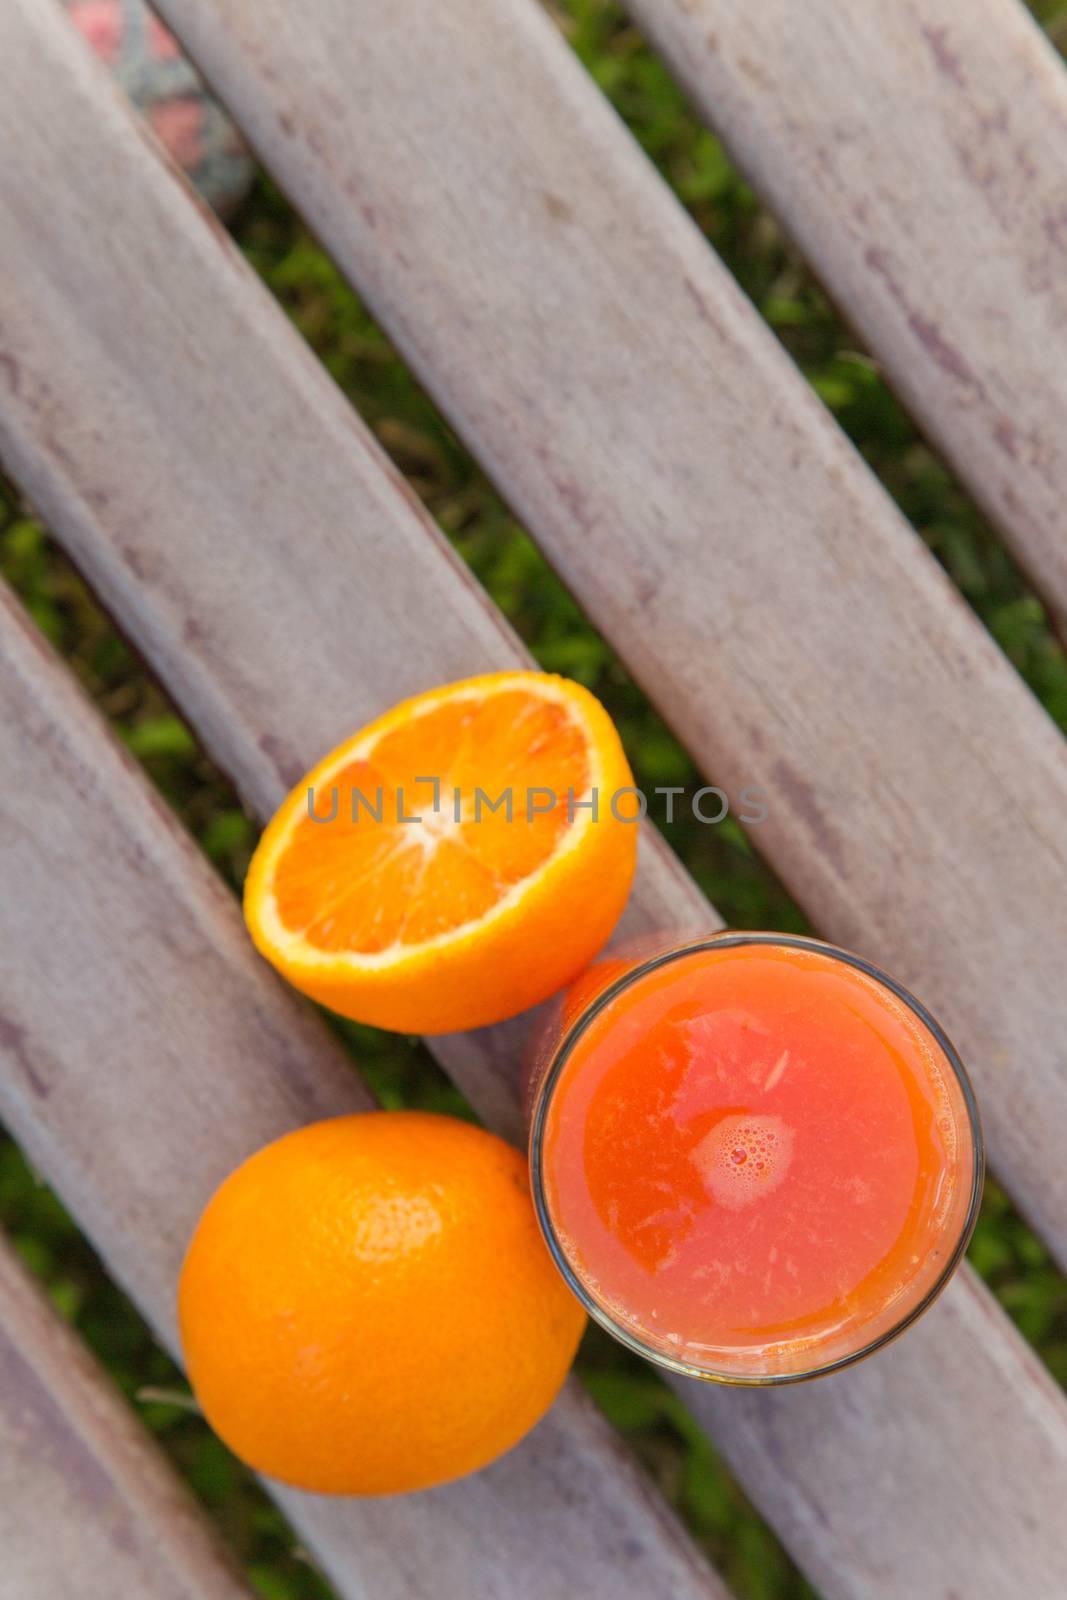 Oranges and a glass of fresh orange juice by tolikoff_photography